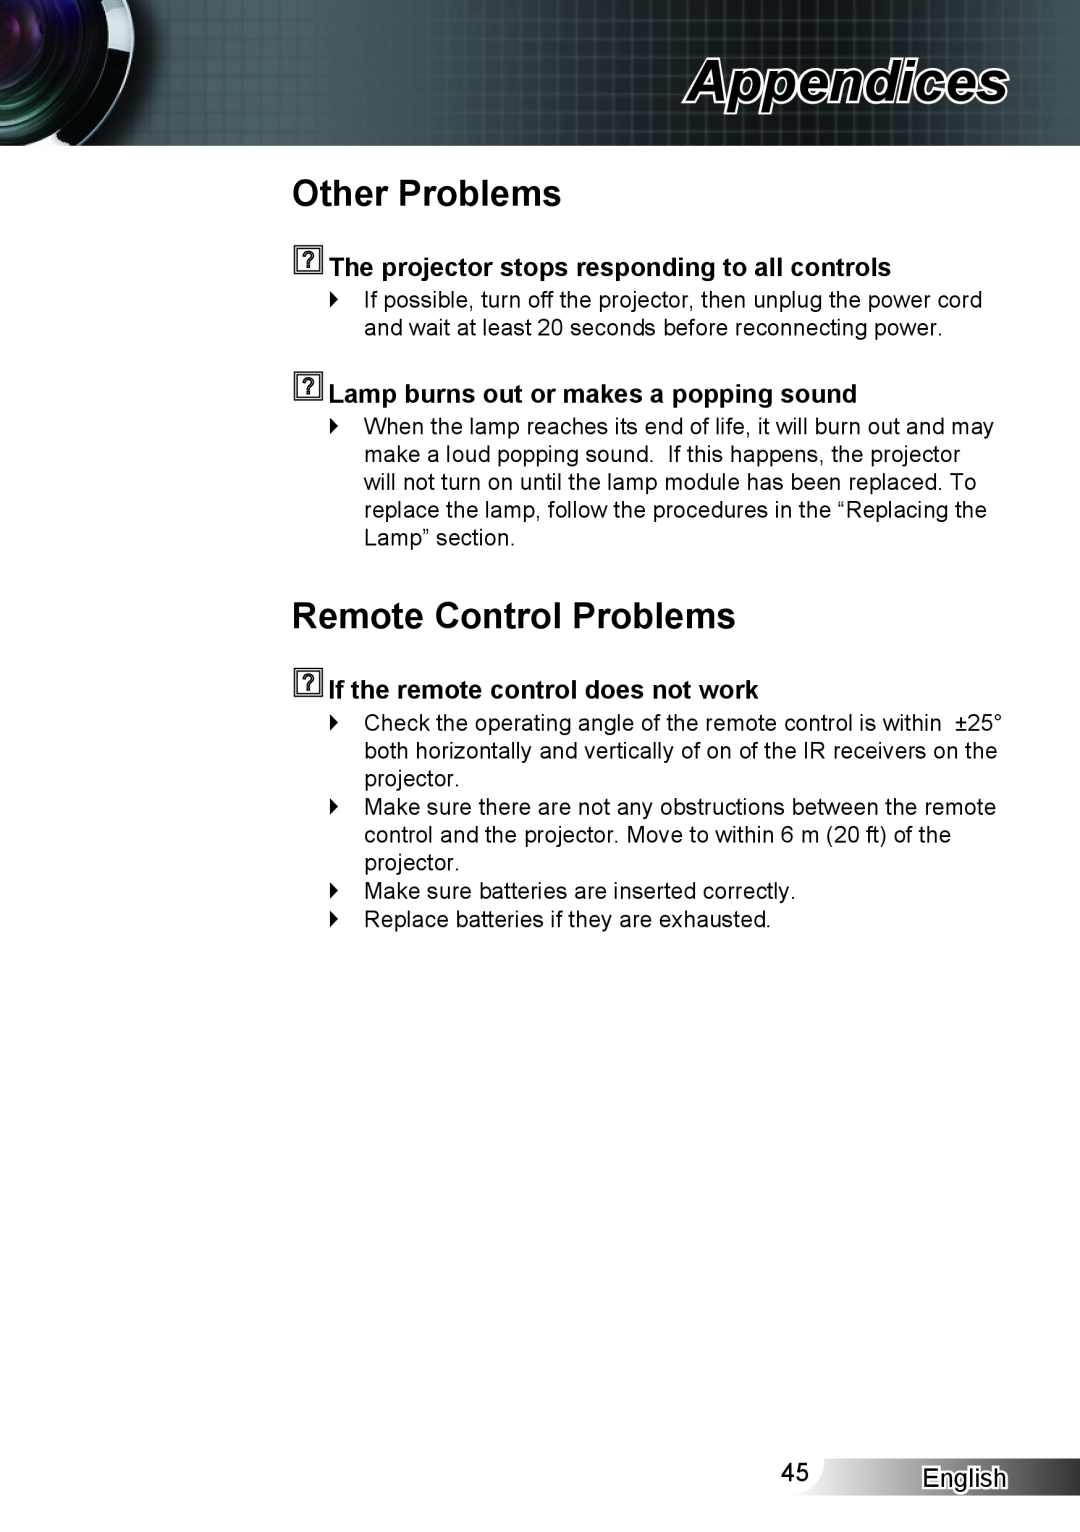 Optoma Technology XX152 N Other Problems, Remote Control Problems, The projector stops responding to all controls, English 